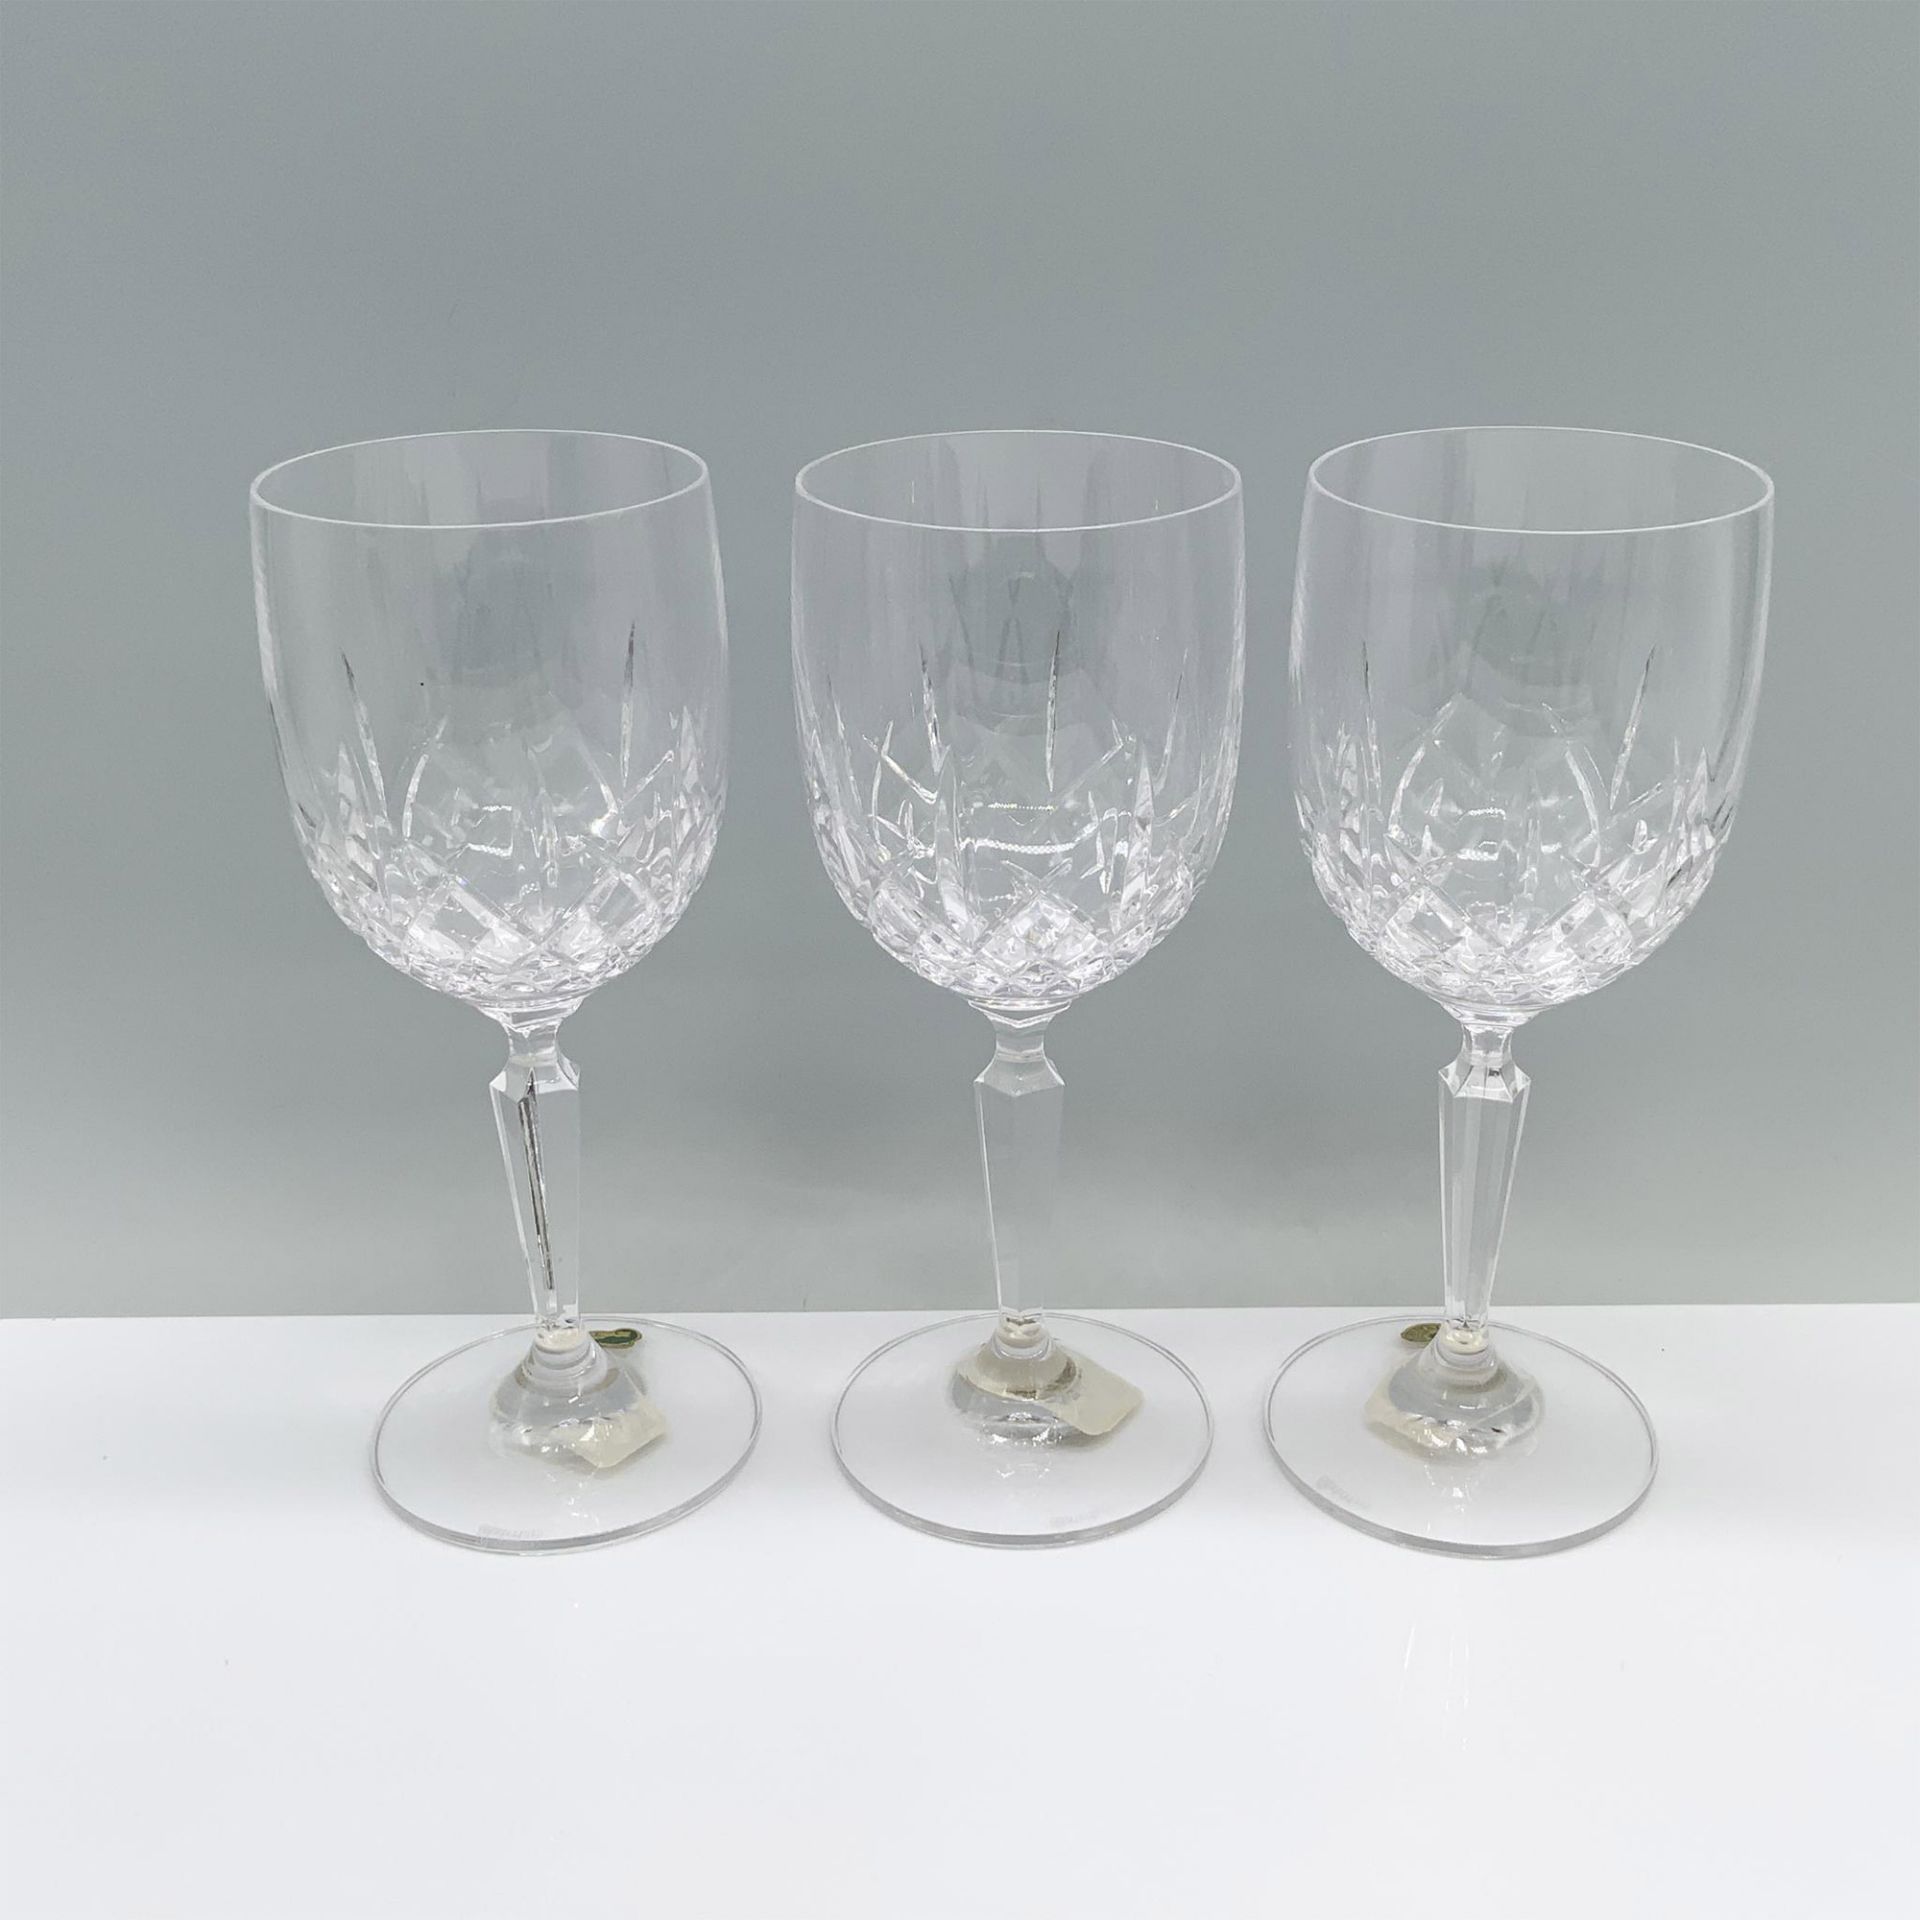 3pc Waterford Crystal Water Goblets, Newgrange - Image 2 of 4